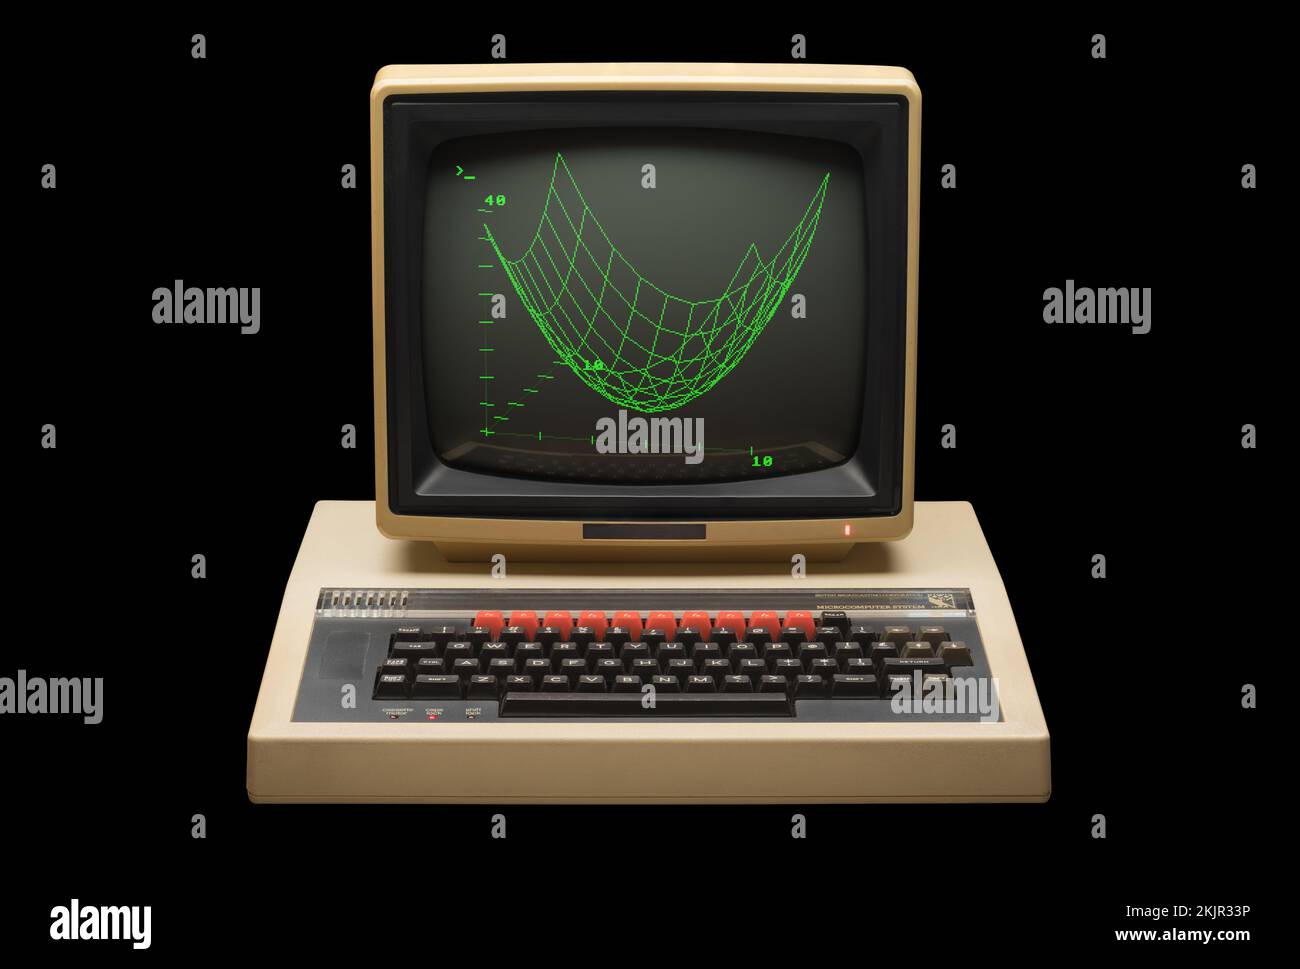 1980s BBC model B microcomputer and green-screen monitor with graphic viewed frontally on a black background Stock Photo